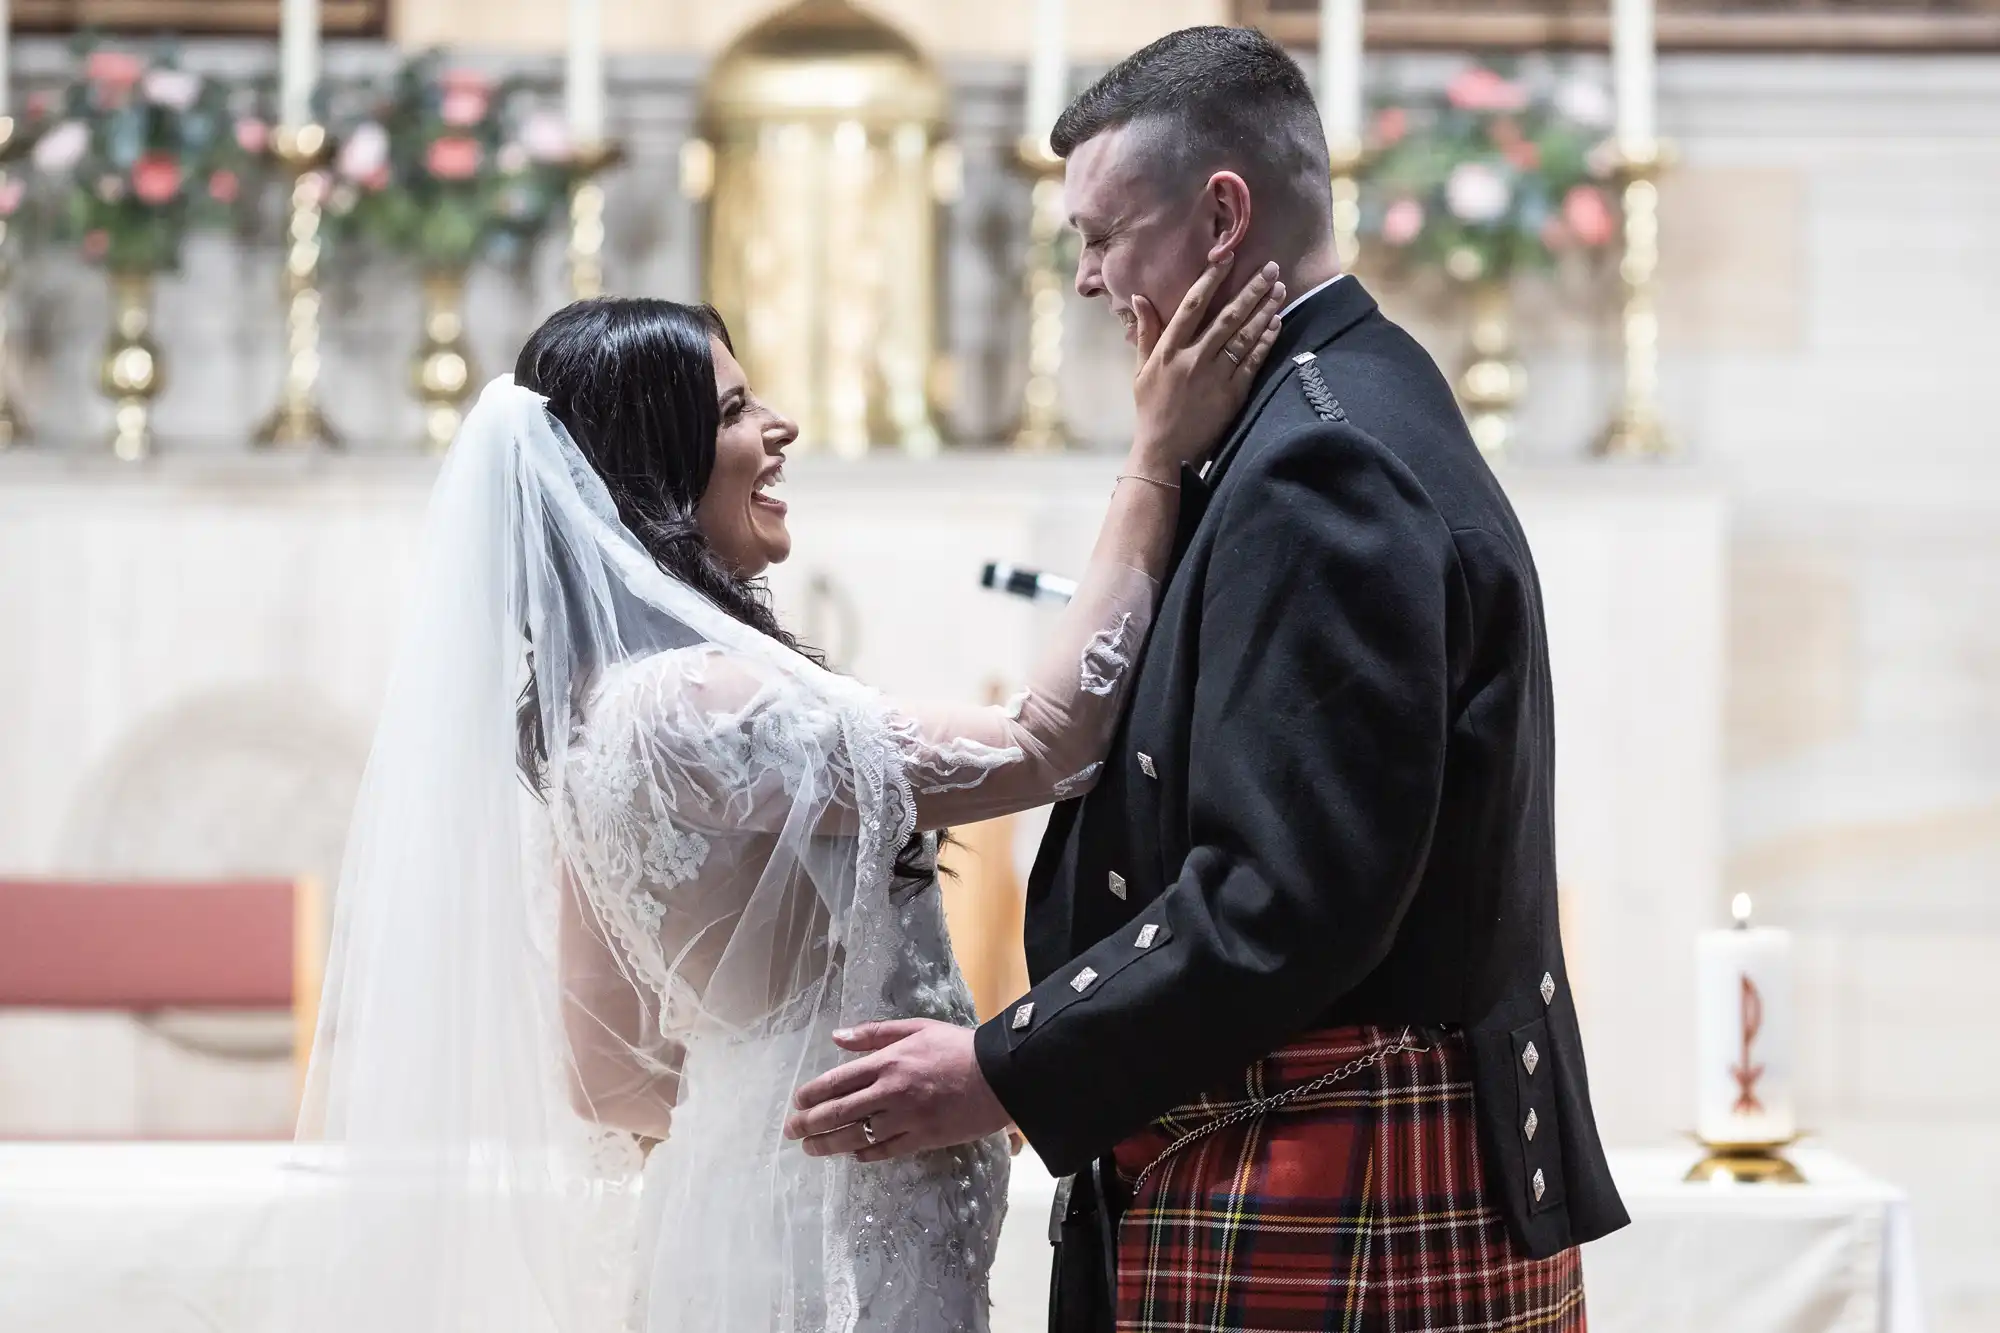 A bride in a white gown and veil tenderly touches the face of her groom in a traditional kilt inside a church.